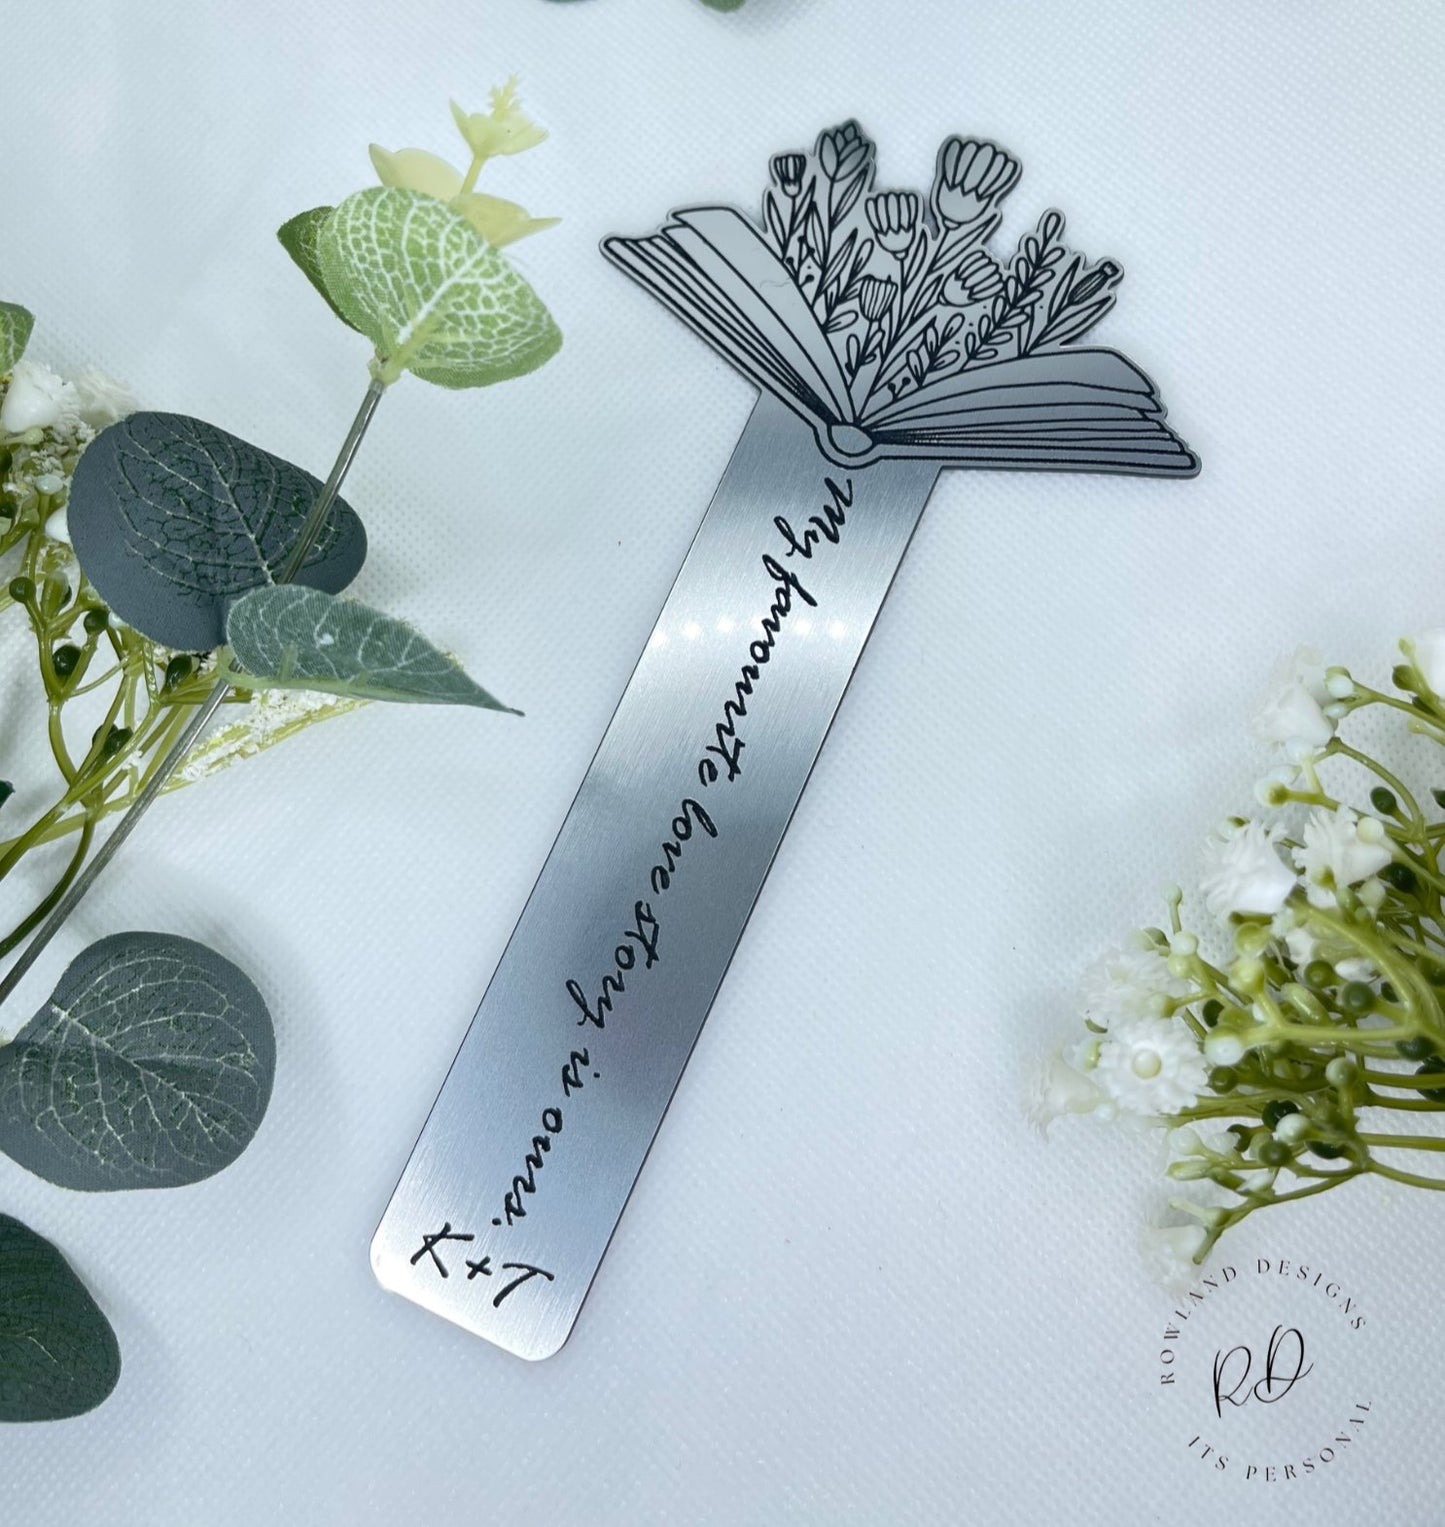 Discover the perfect gift for yourself or fellow book enthusiasts - bookmarks that combine practicality with elegance. Customize these bookmarks with your initials for that extra personal touch, as illustrated in the images. An ideal blend of functionality and distinctive style, making for a thoughtful present.